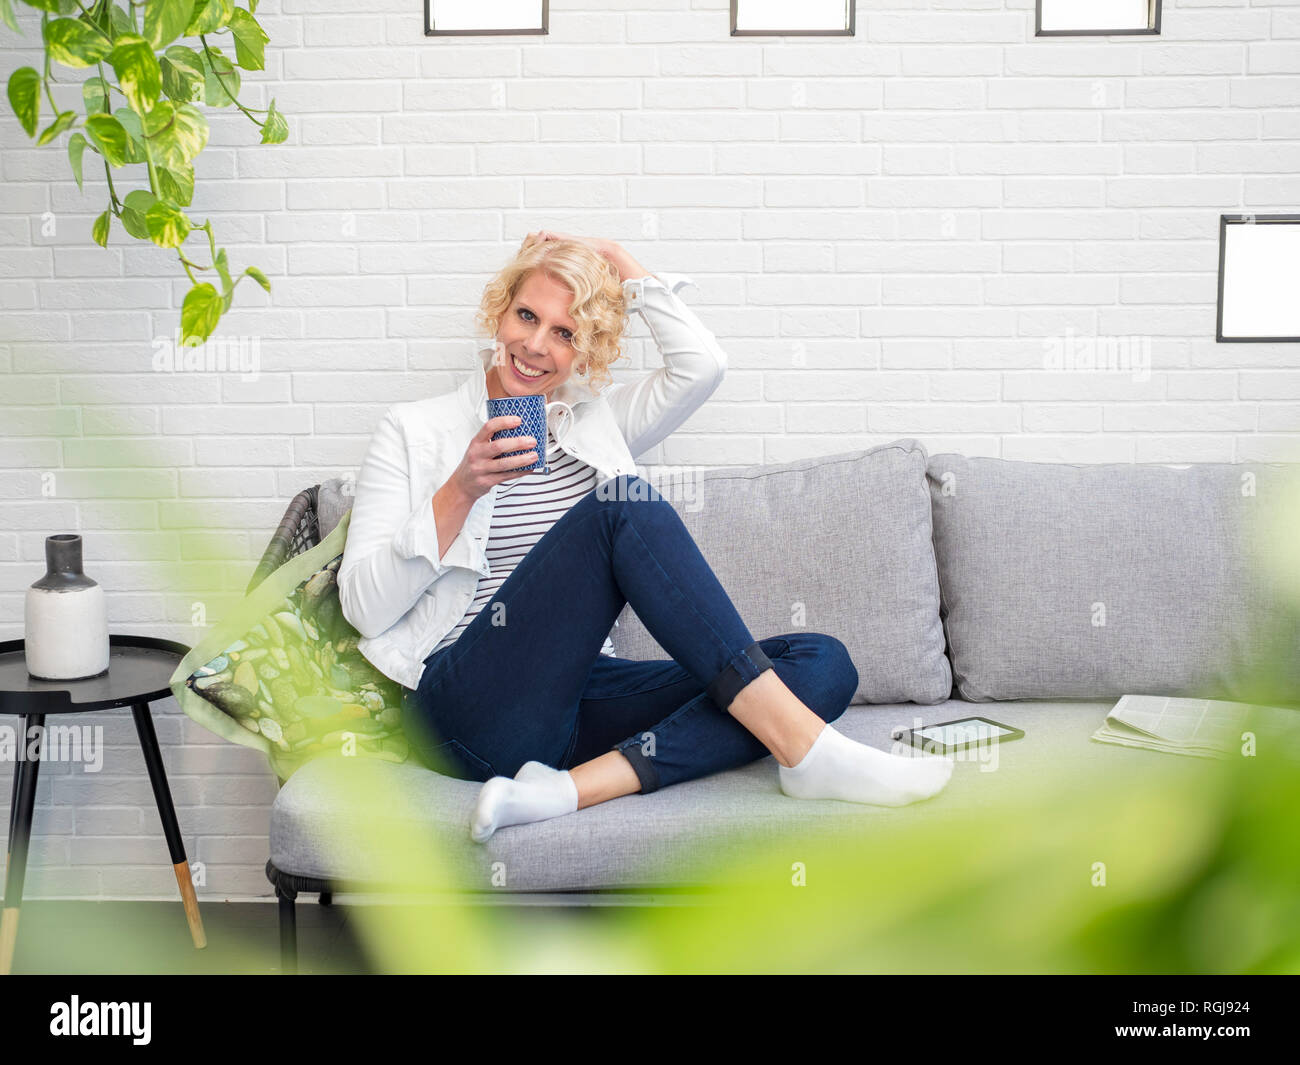 Portrait of smiling mature woman sitting on couch at home holding coffee mug Stock Photo